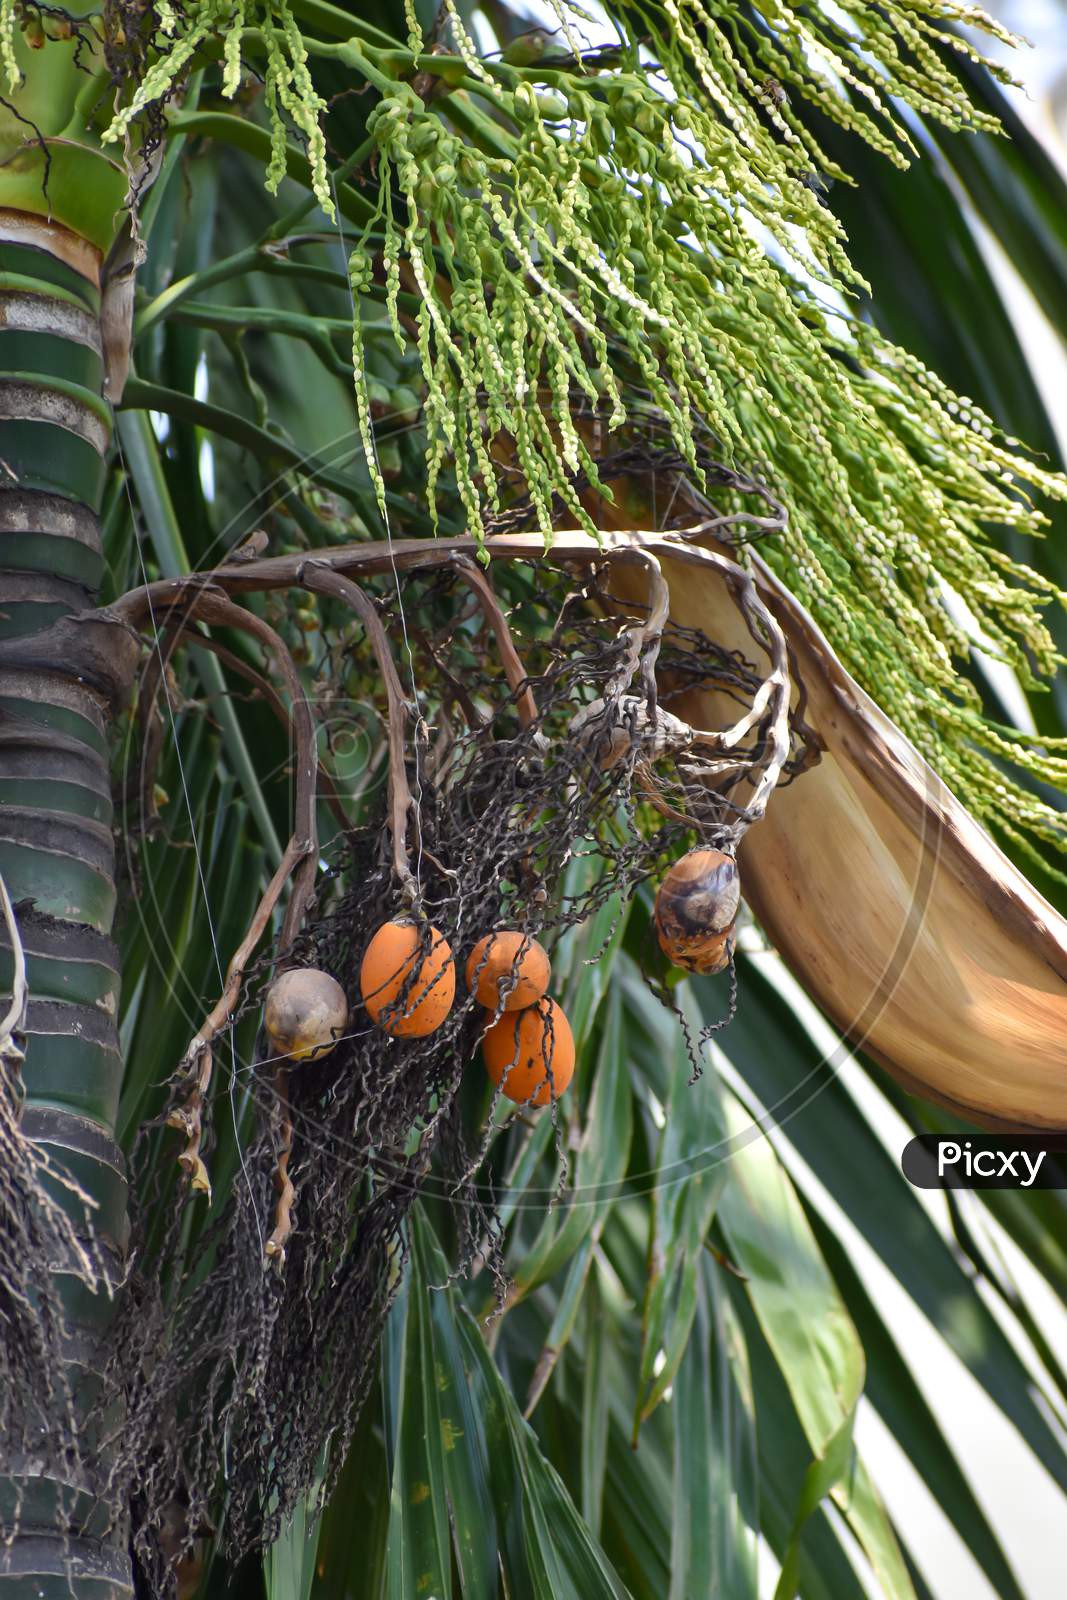 Areca Nut Or Betel Nut Flower And Fruit On The Tree. The Areca Nut Is The Seed Of The Areca Palm (Areca Catechu), Which Grows In Much Of The Tropical Pacific.